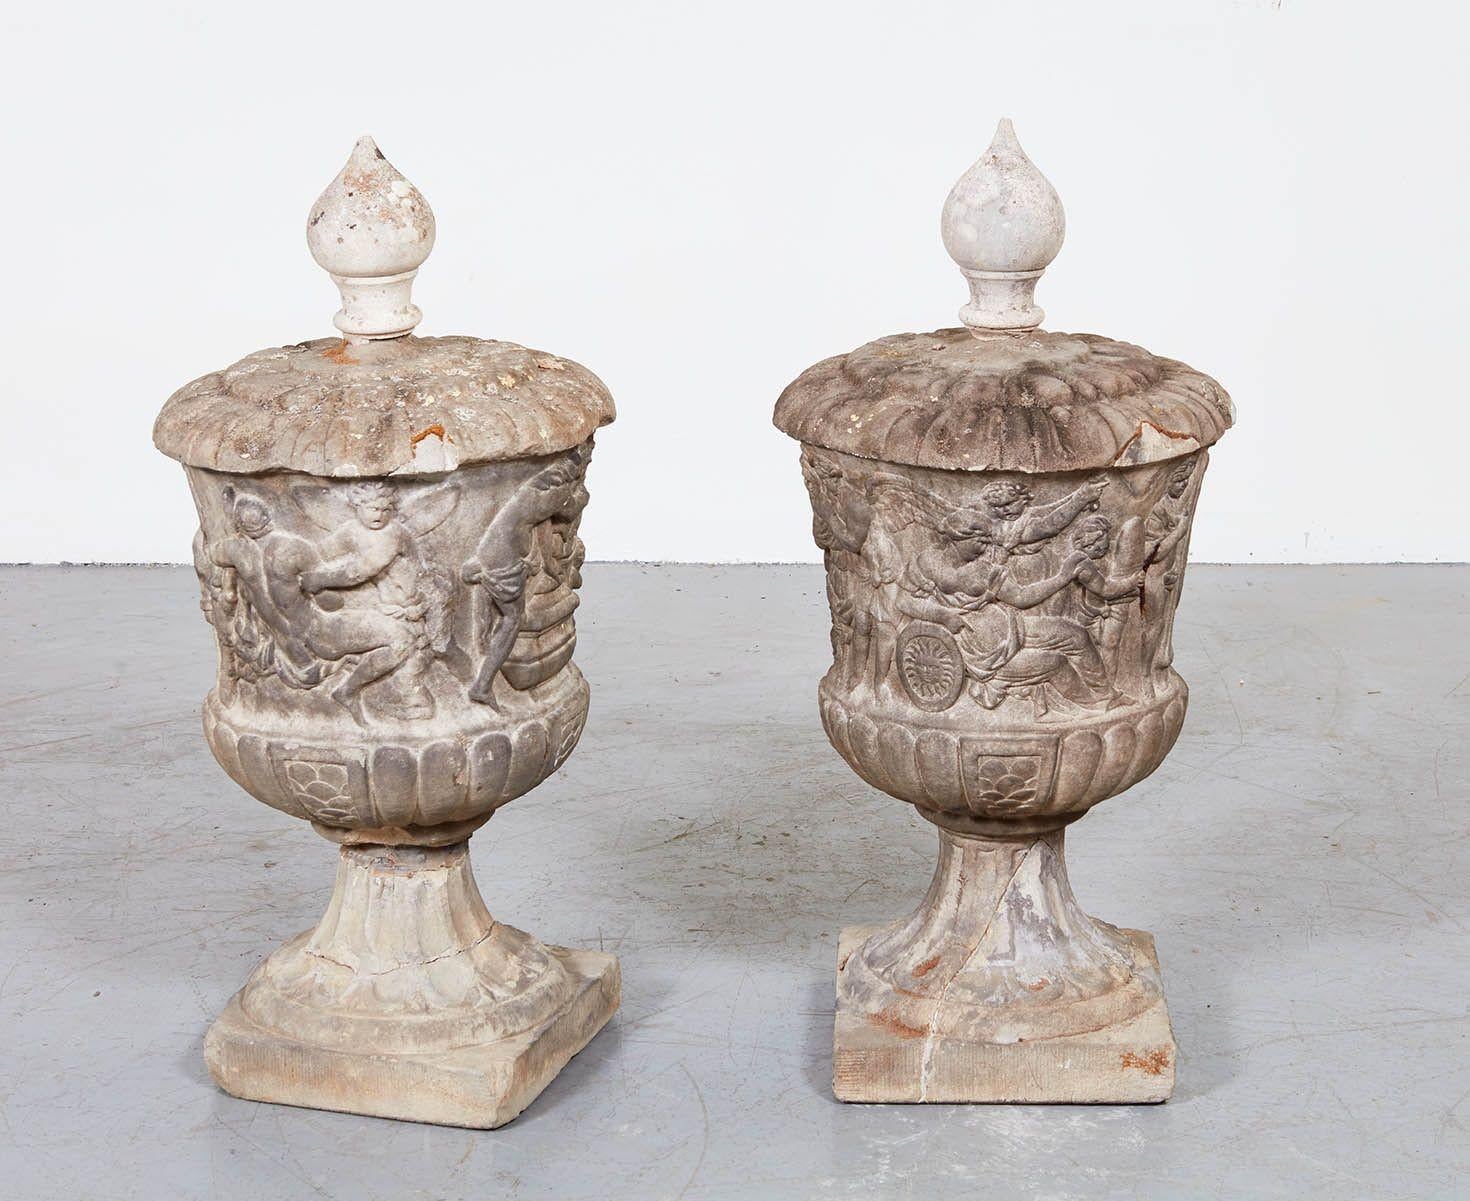 Belgian Rare and Important Pair of 17th c. Carved Marble Urns For Sale